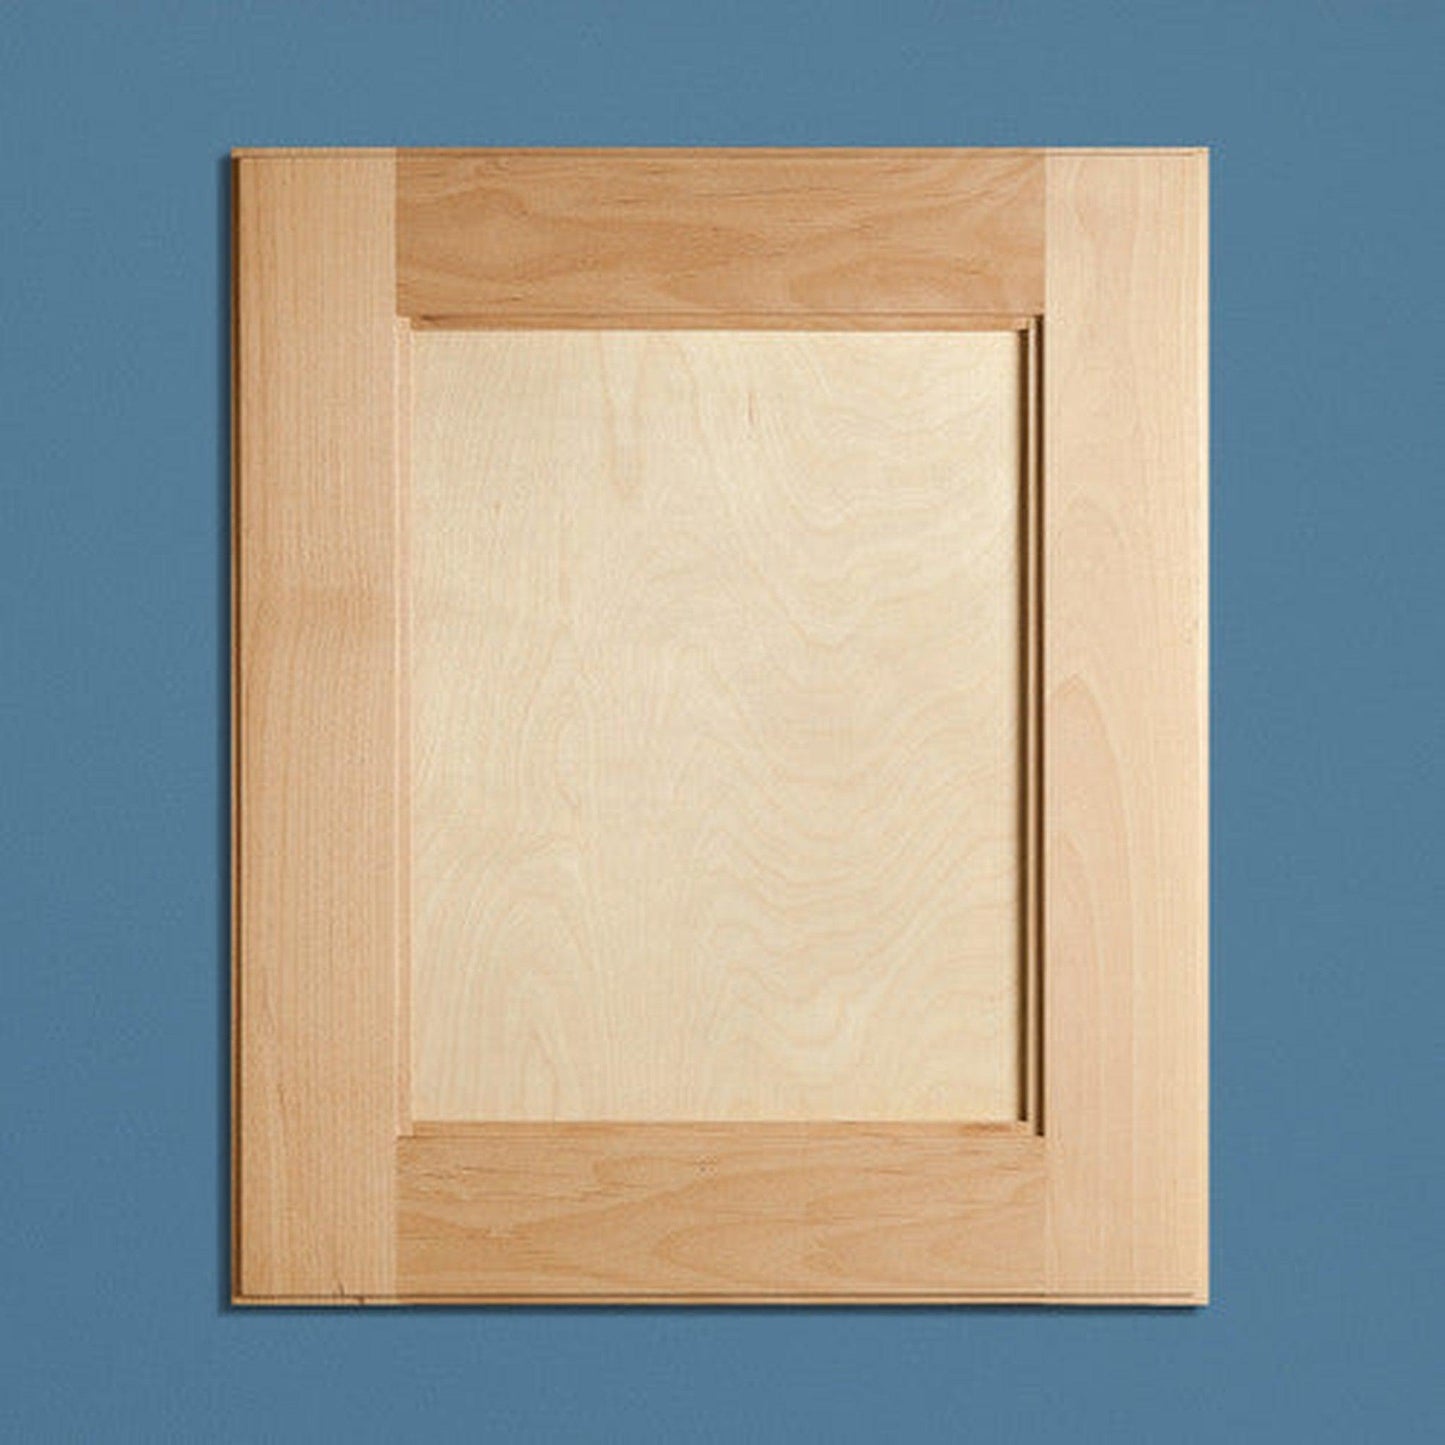 Fox Hollow Furnishings 14" x 18" Unfinished Style Beadboard White Interior Special 3" Depth Recessed Medicine Cabinet With Mirror